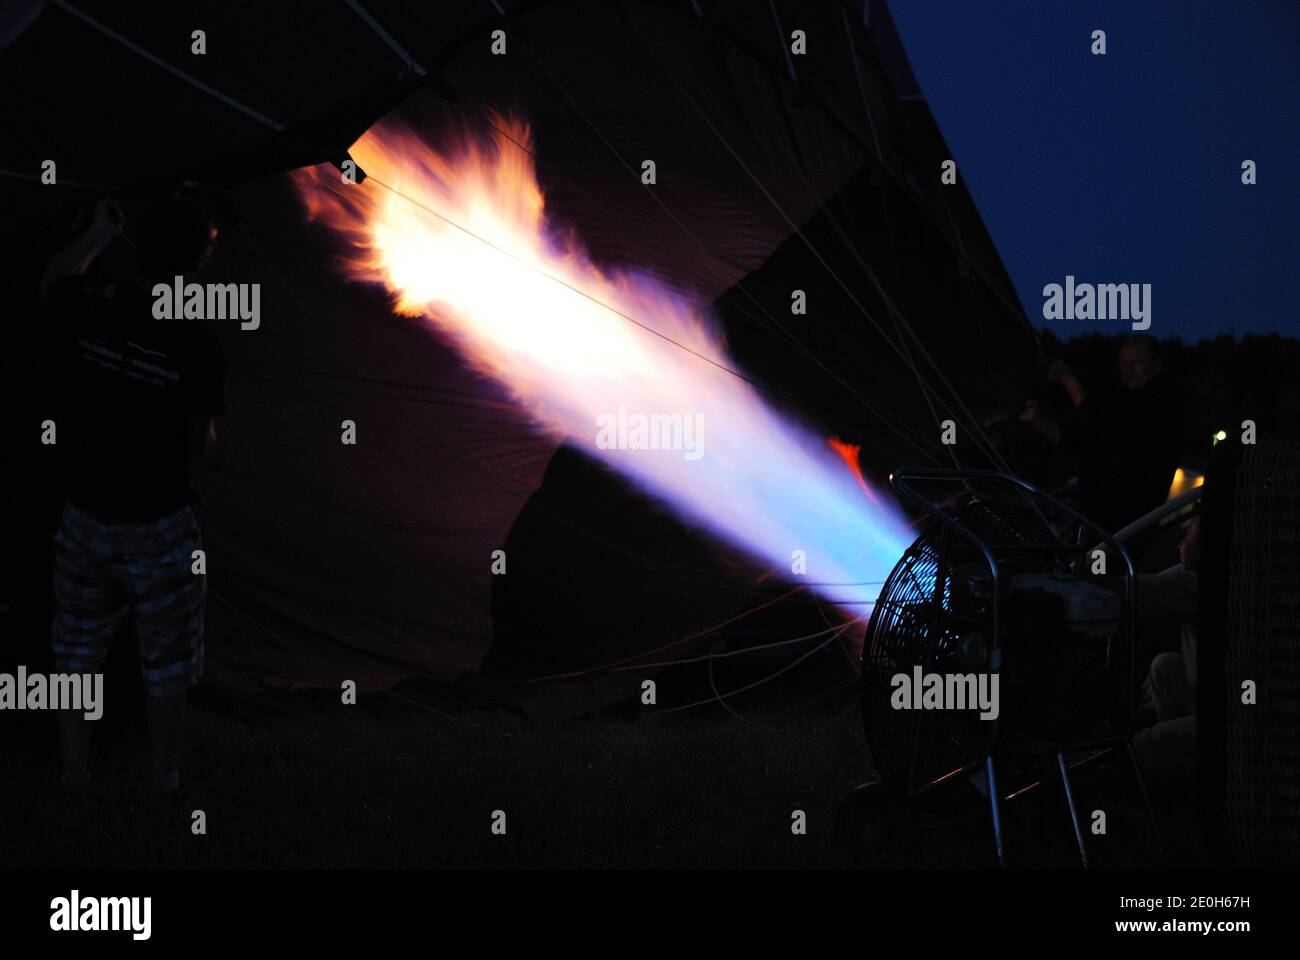 bright hot firing during inflate one balloon Stock Photo